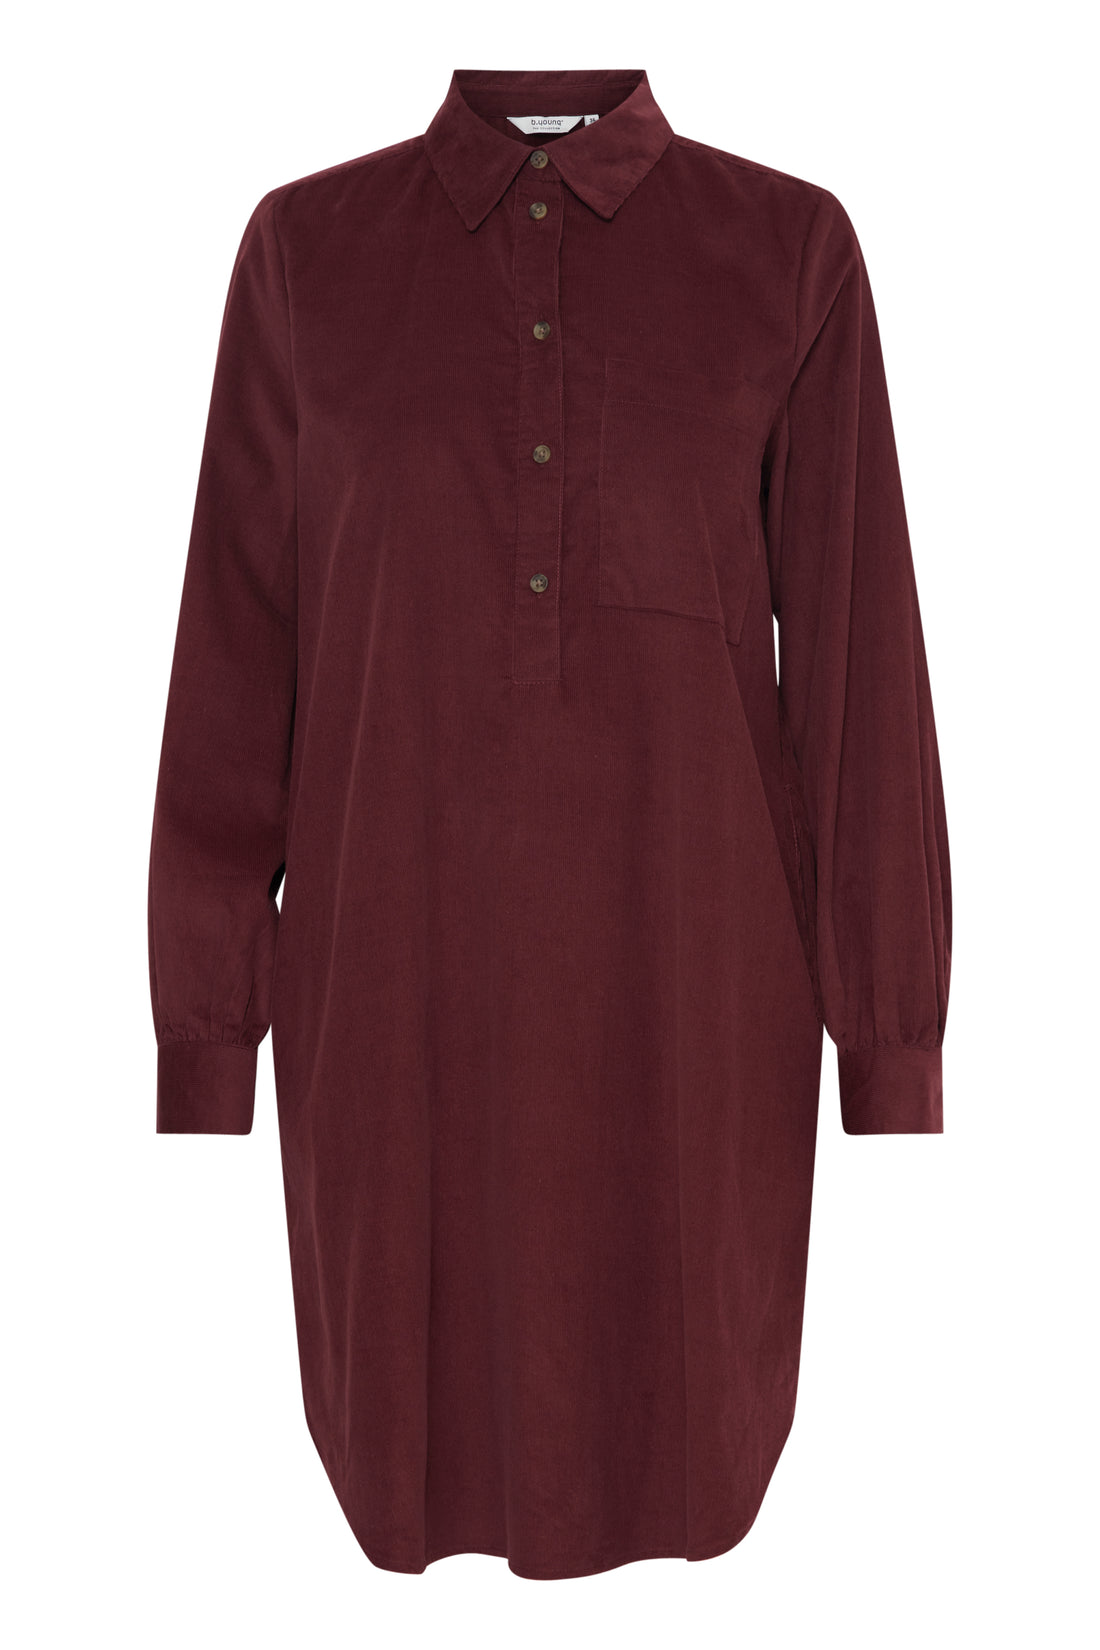 Robe Chemise Dinia Port Royal B.Young